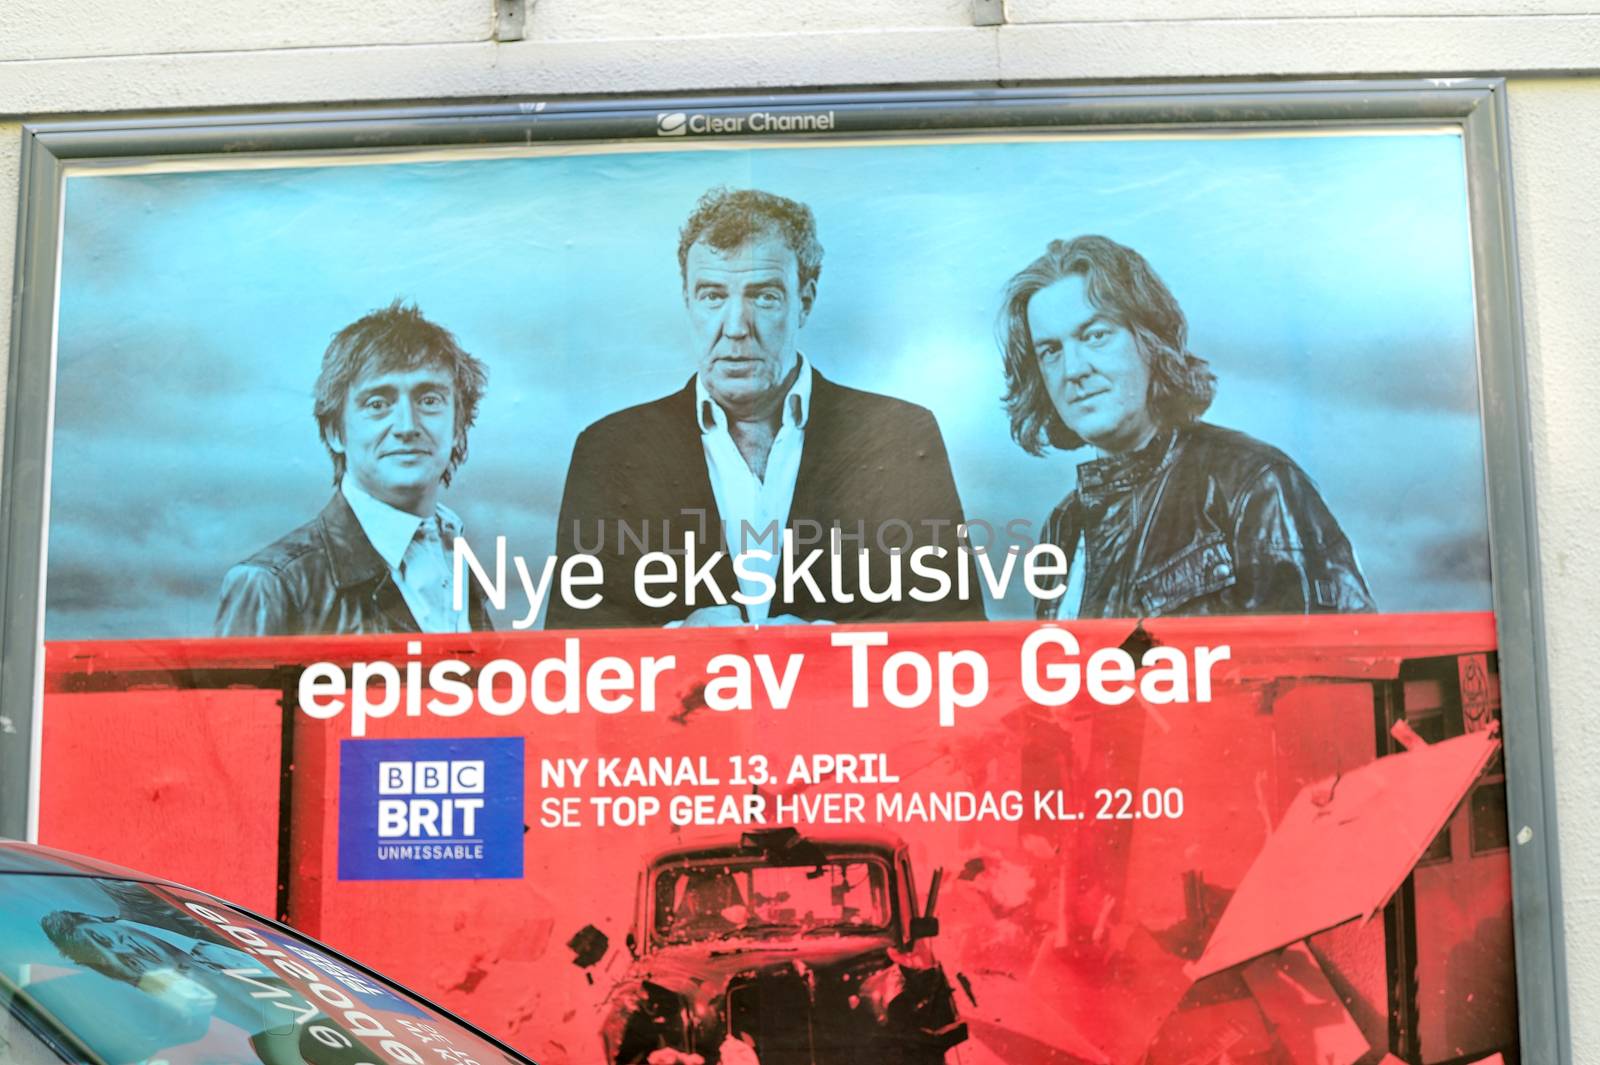 Norwegian Poster fot the Cancelled BBC Top Gear Production Stava by Whiteboxmedia